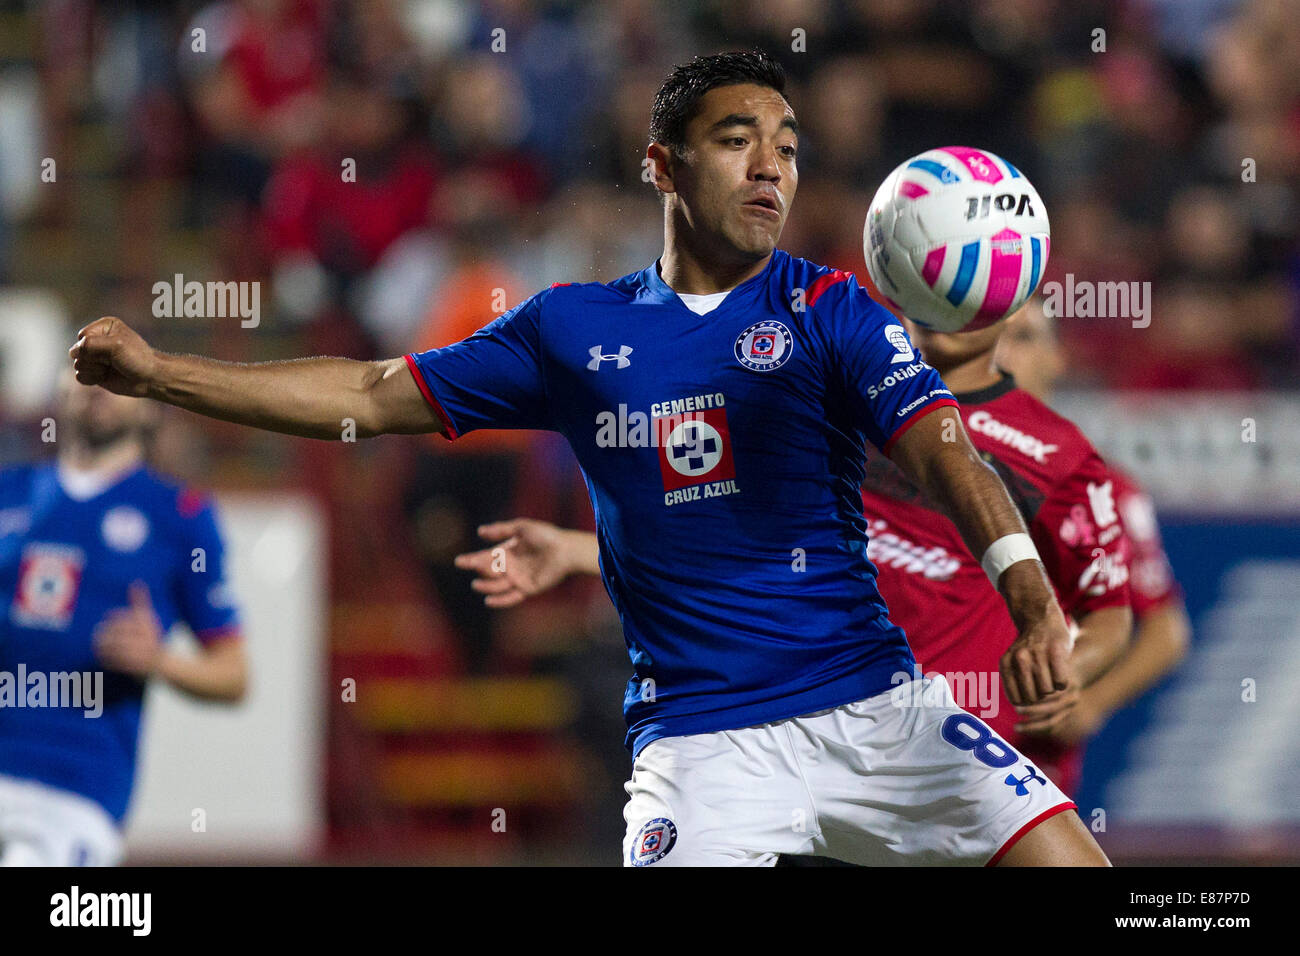 Tijuana, Mexico. 1st Oct, 2014. Juan Carlos Nunez (Back) of Xolos vies for the ball with Marco Fabian of Cruz Azul, during their match of the 2014 MX League Opening Tournament held at Caliente Stadium in Tijuana city, northwest Mexico, on Oct. 1, 2014. Credit:  Guillermo Arias/Xinhua/Alamy Live News Stock Photo